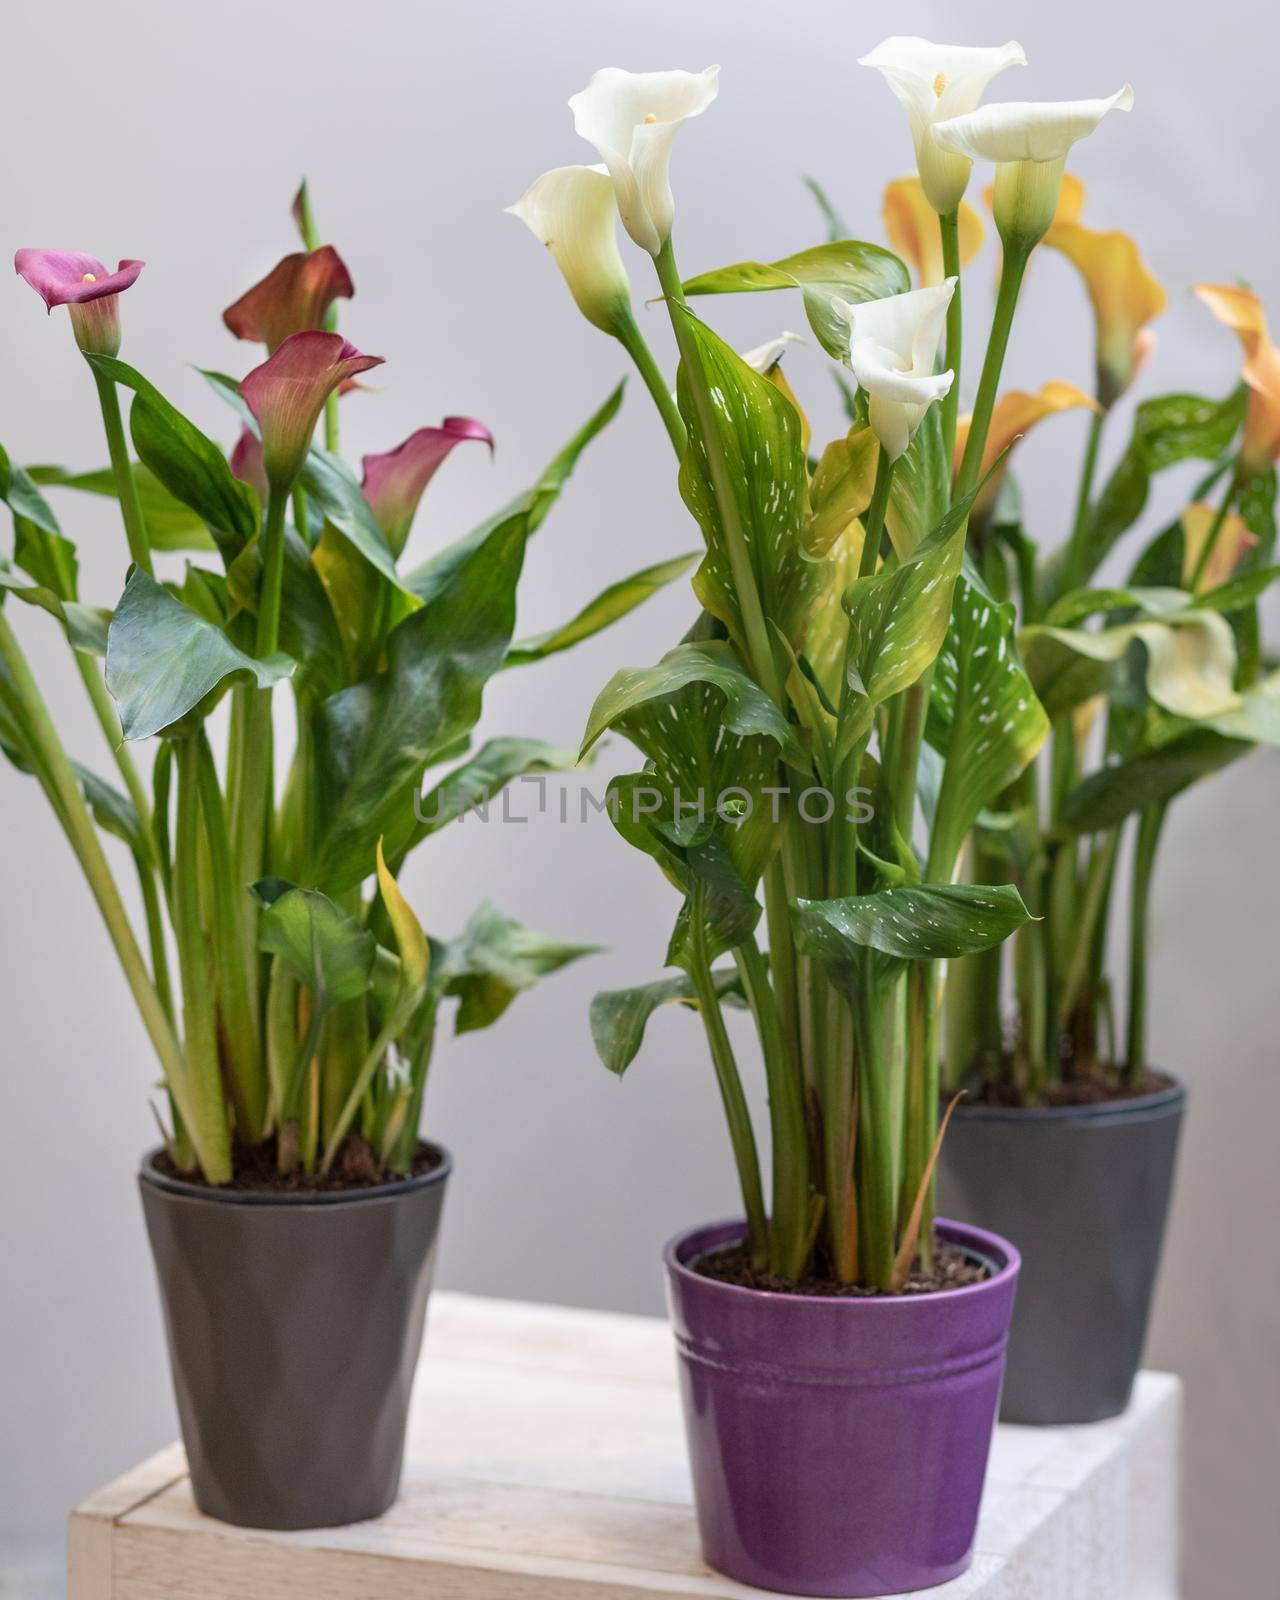 Colorful Arum lily flower plants